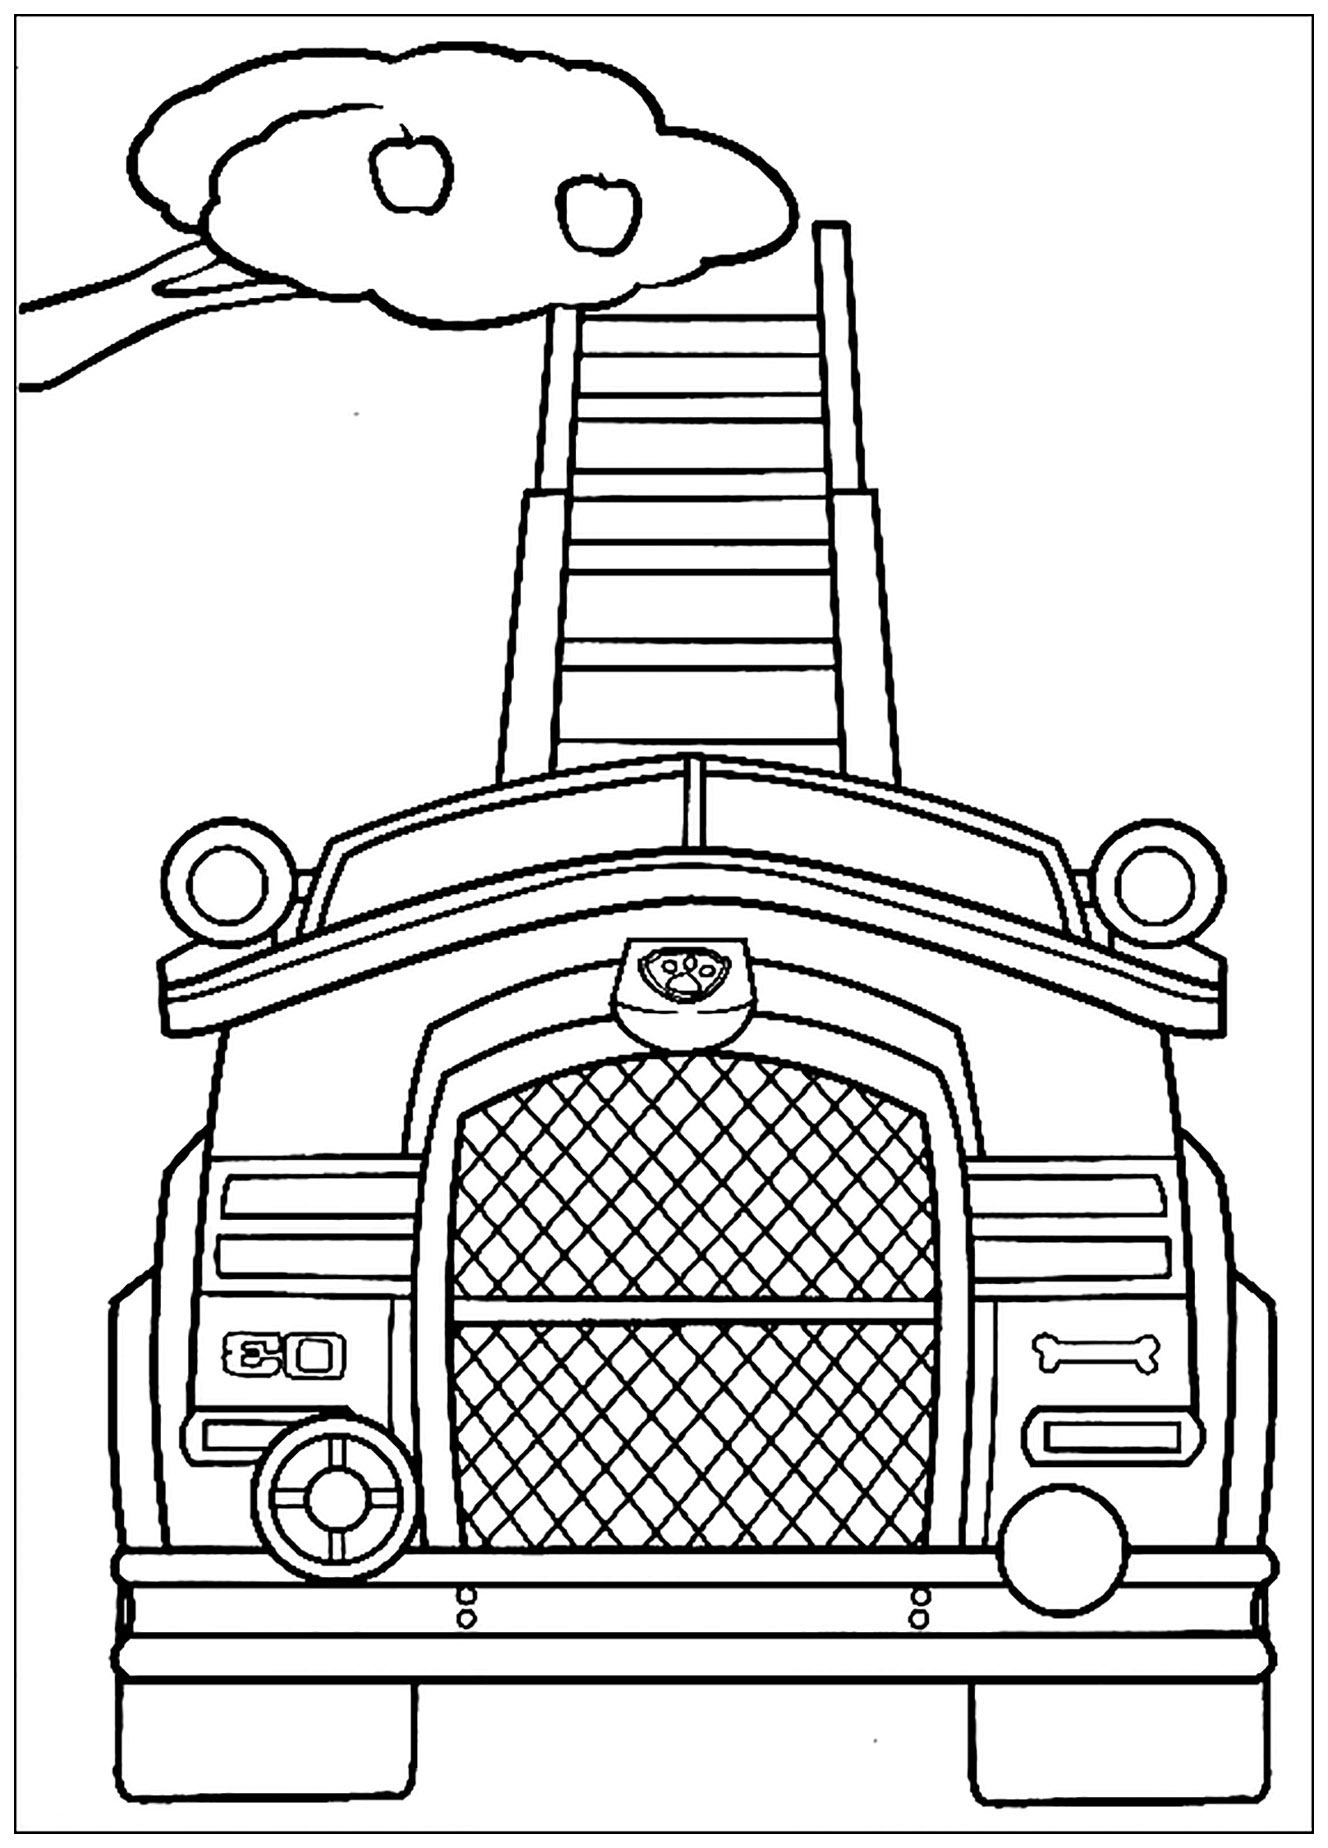 Simple Paw Patrol coloring page to print and color for free